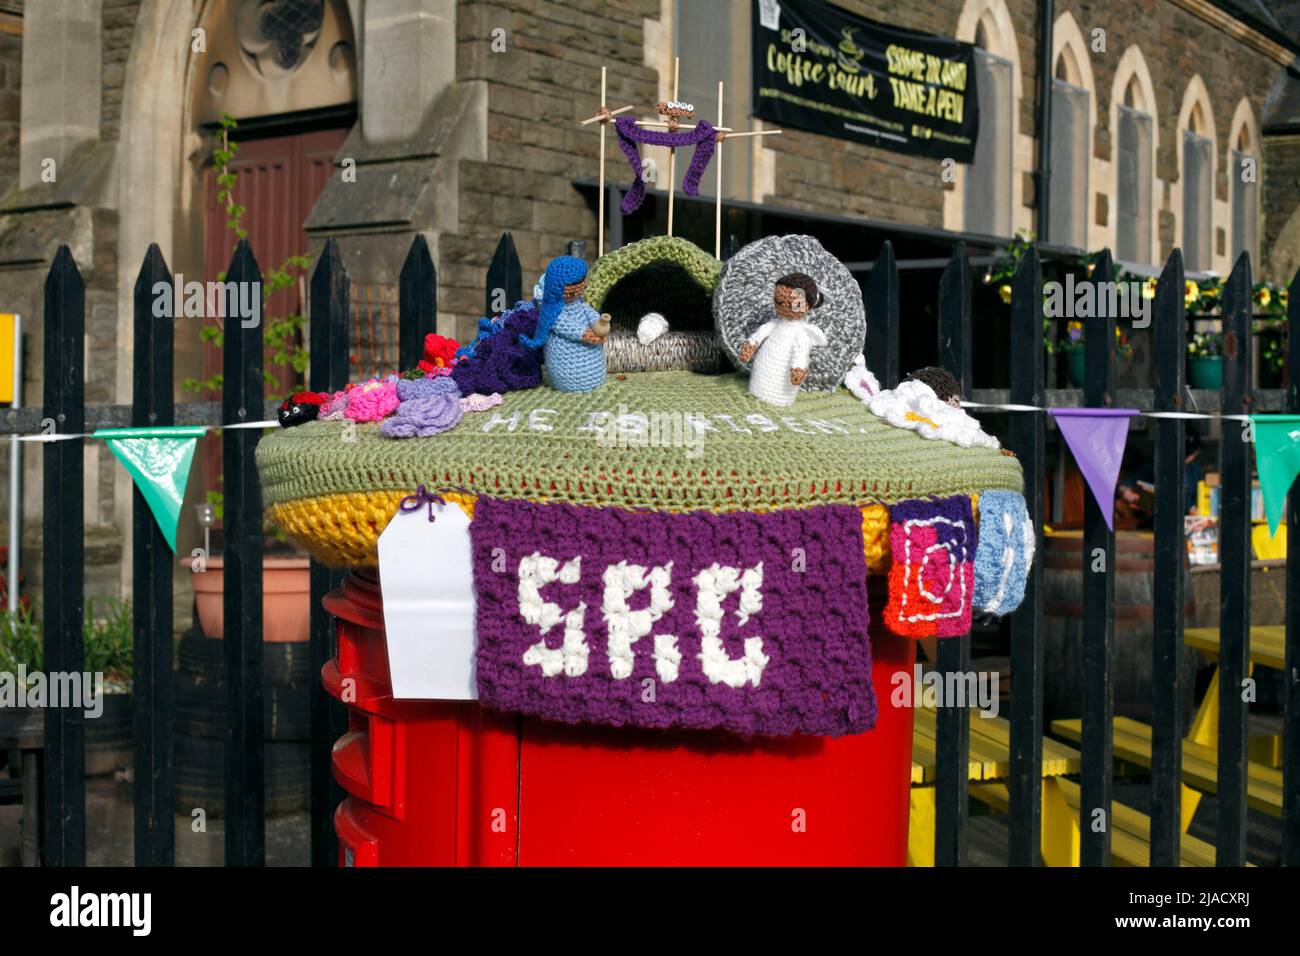 Easter scene as a knitted crafted woollen postbox topper, in front of a church. Stock Photo